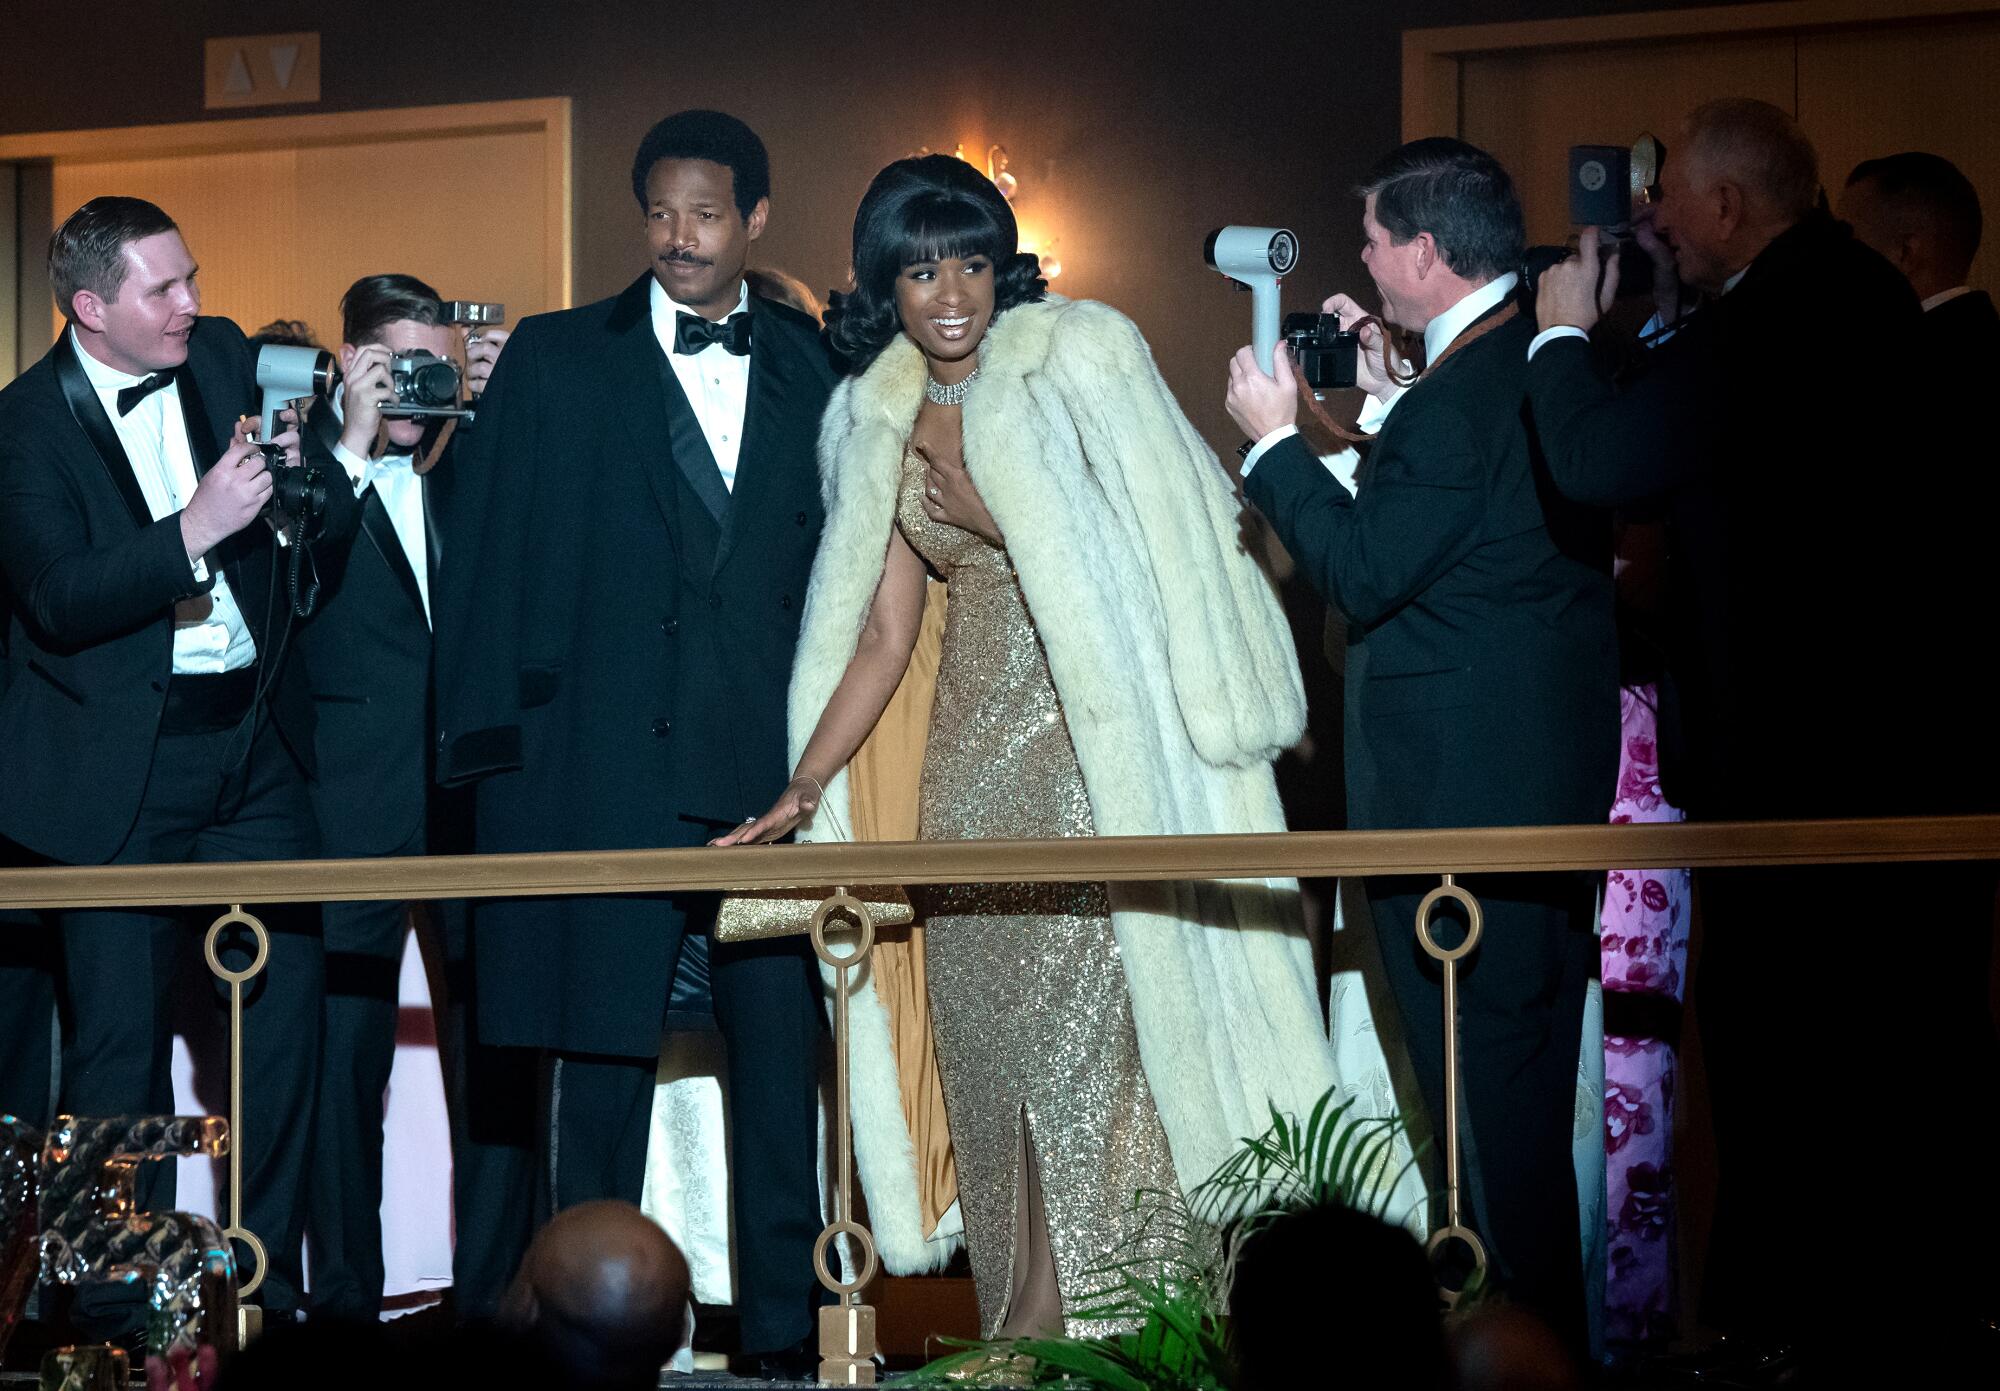 Marlon Wayans stars as Ted White and Jennifer Hudson as Aretha Franklin wrapped in fur  in "Respect."